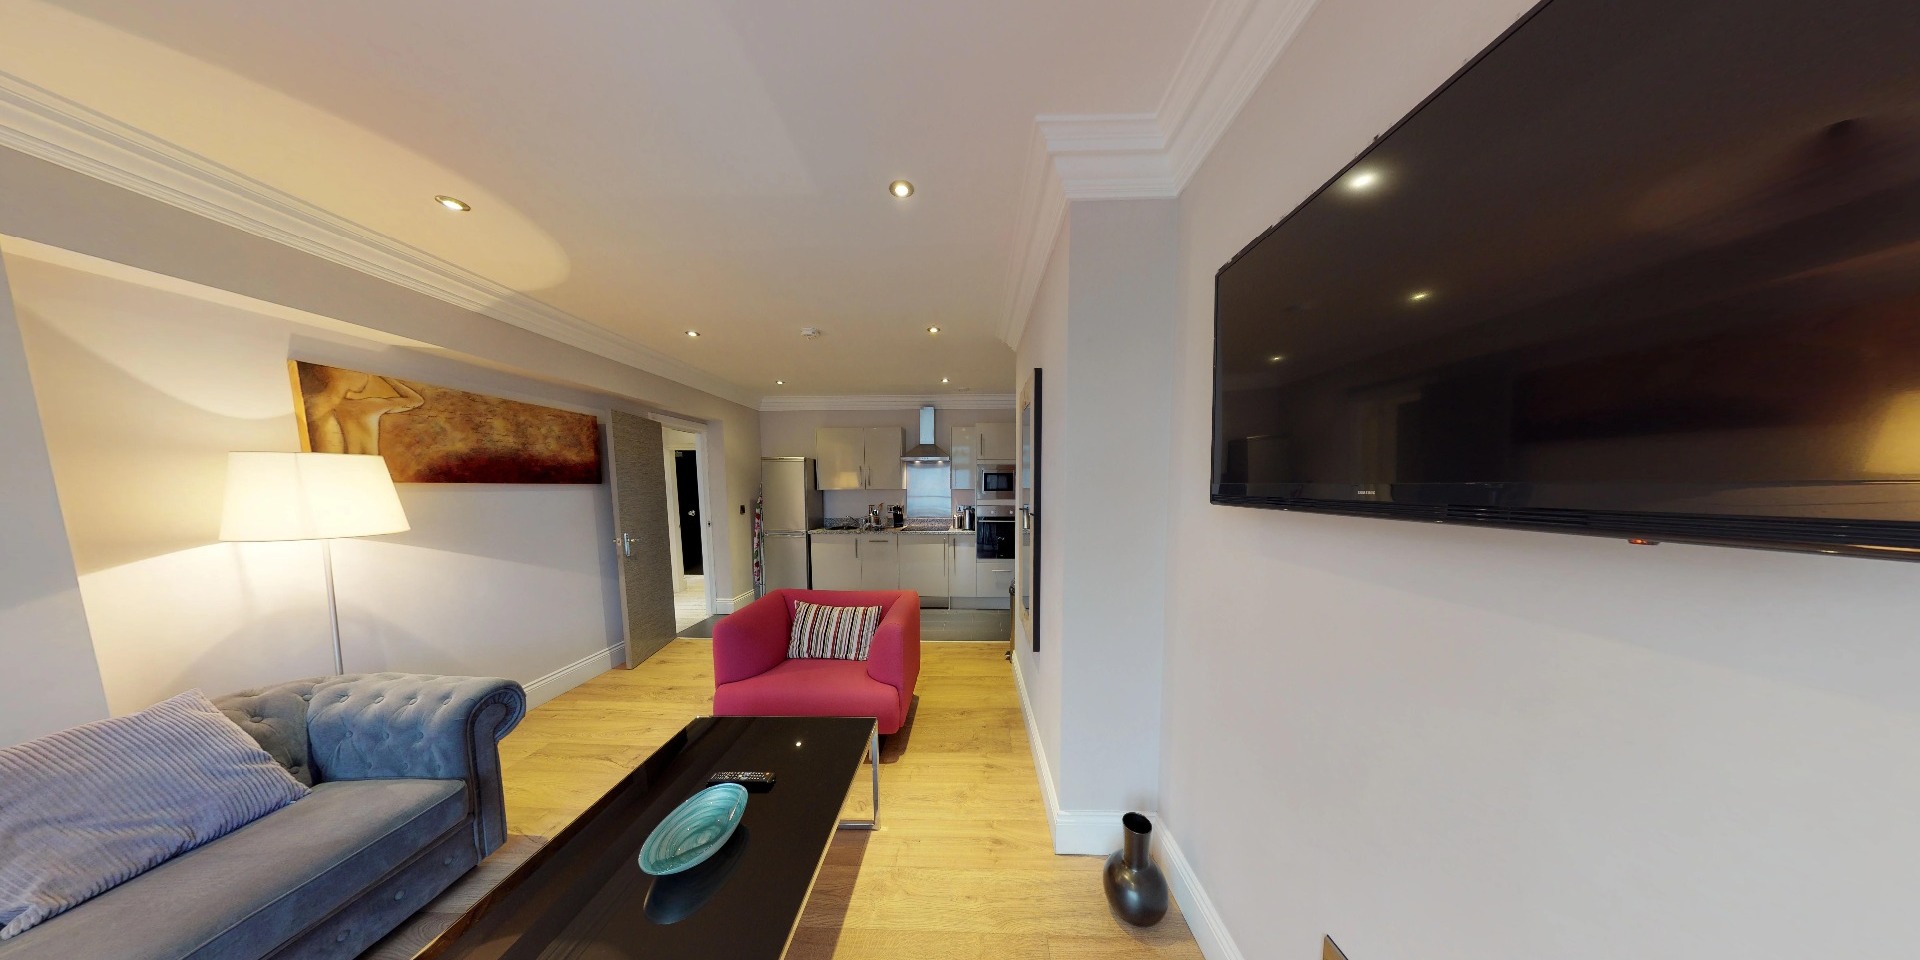 Harrogate Lifestyle offers stylish executive one bedroom one bathroom apartment for 1 or 2 people with double or twin bed set up facility. For Bookings Call now - 01423 568820